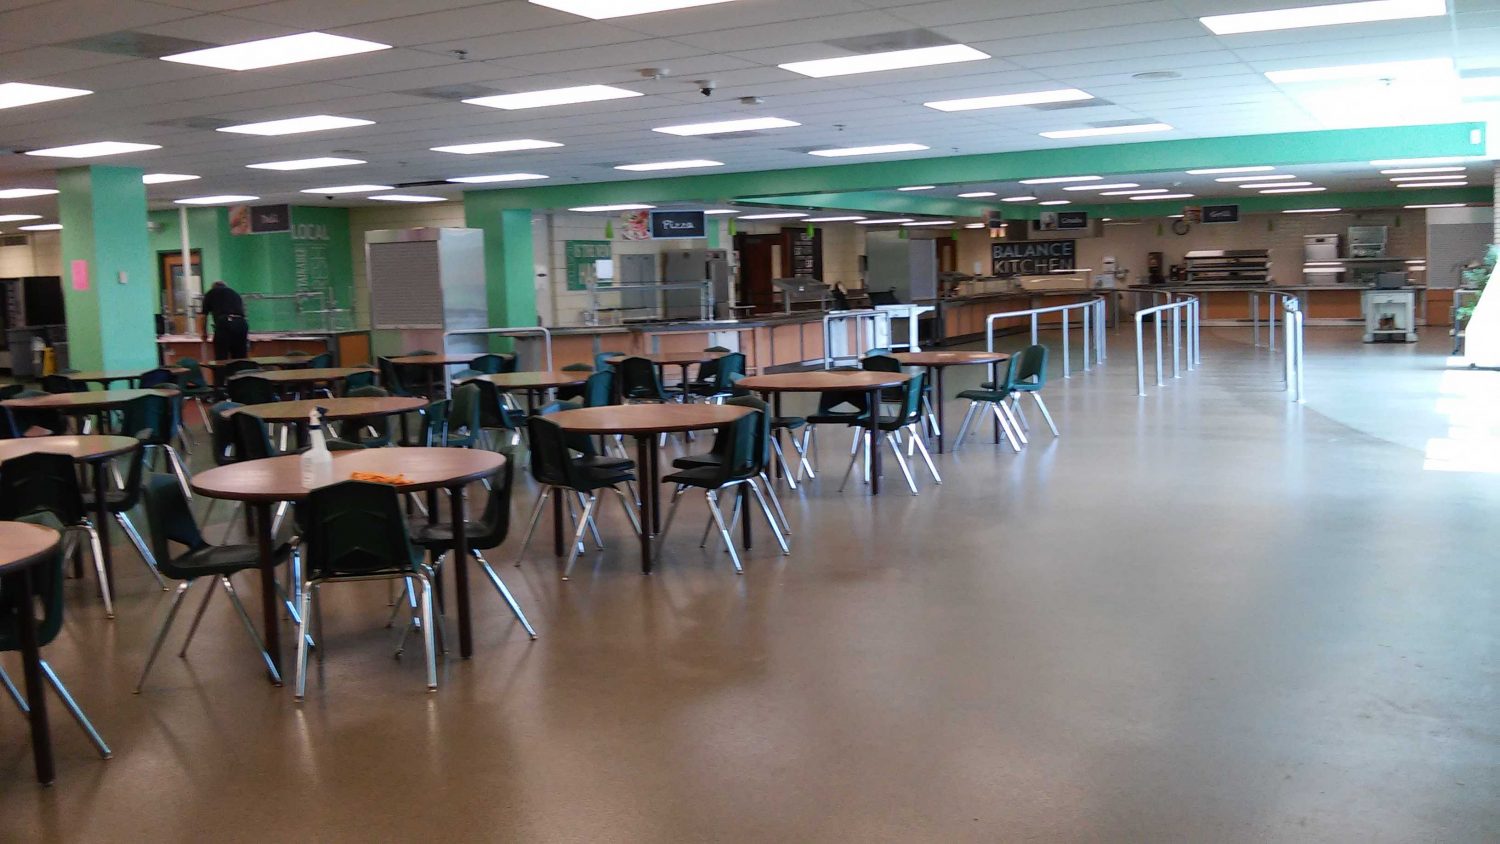 The newly updated cafeteria has caused some problems during student lunch periods.